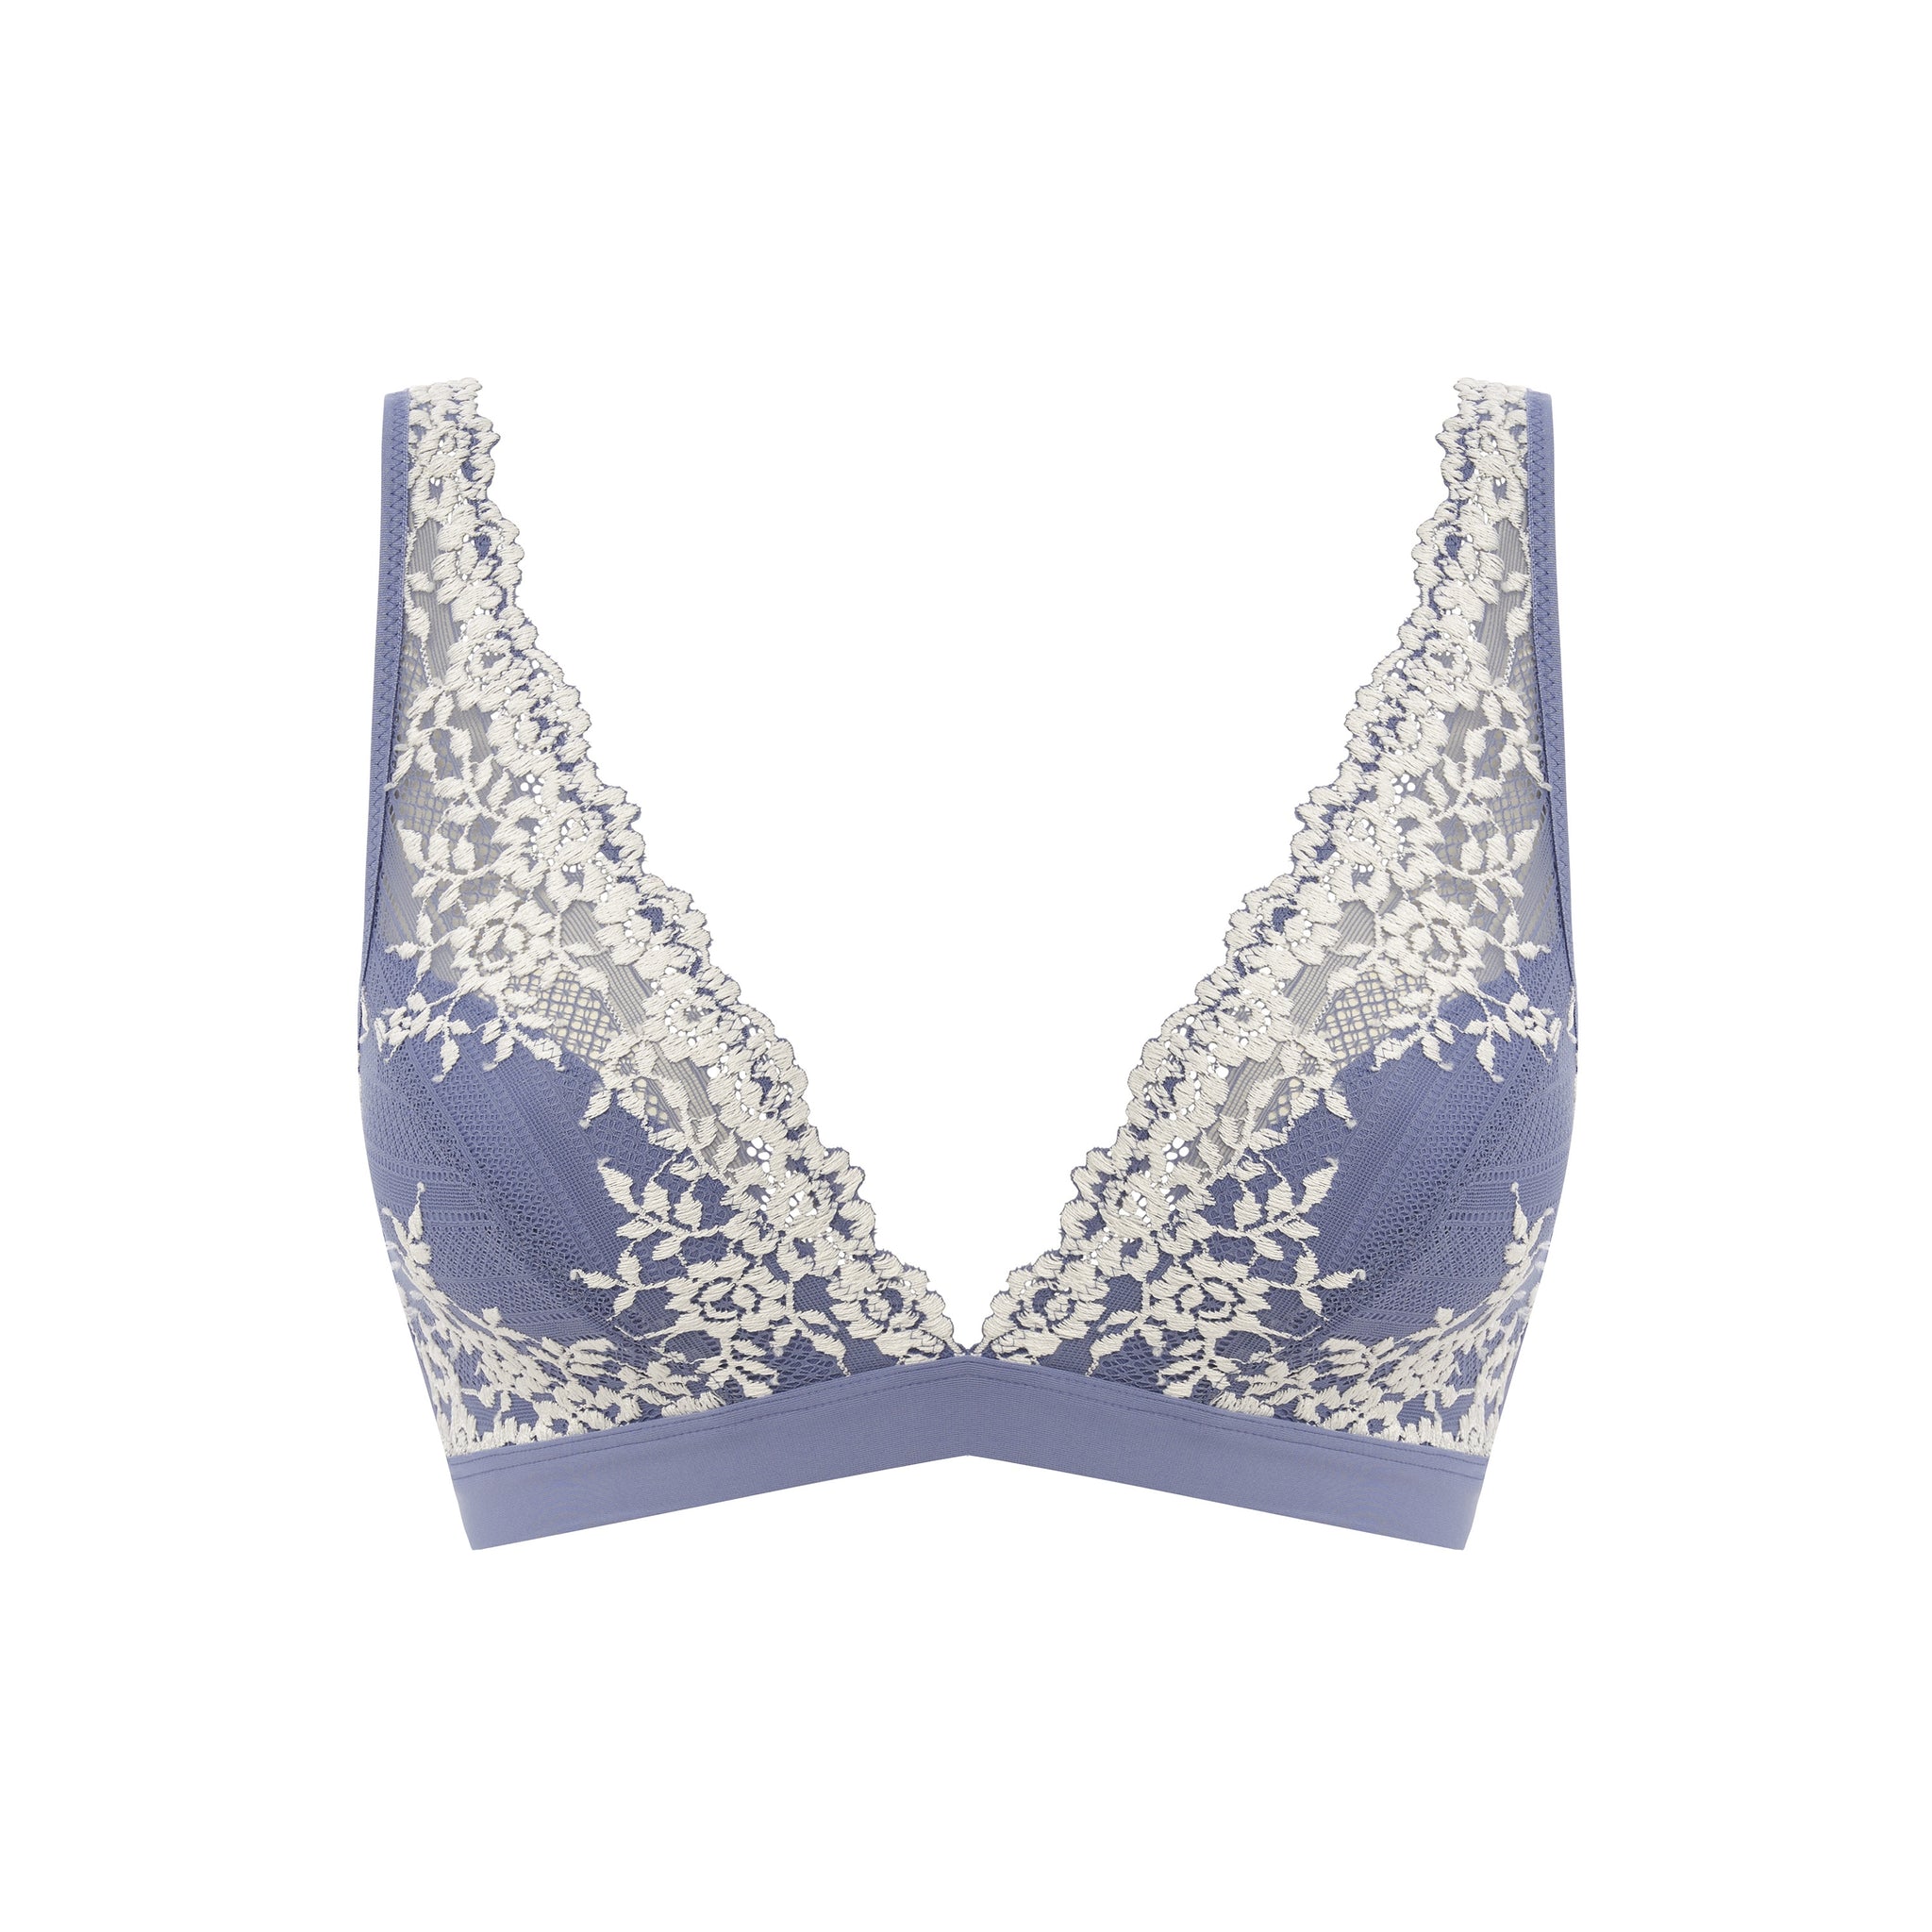 Wacoal Embrace Lace Pieces in Stunning Bristol Blue